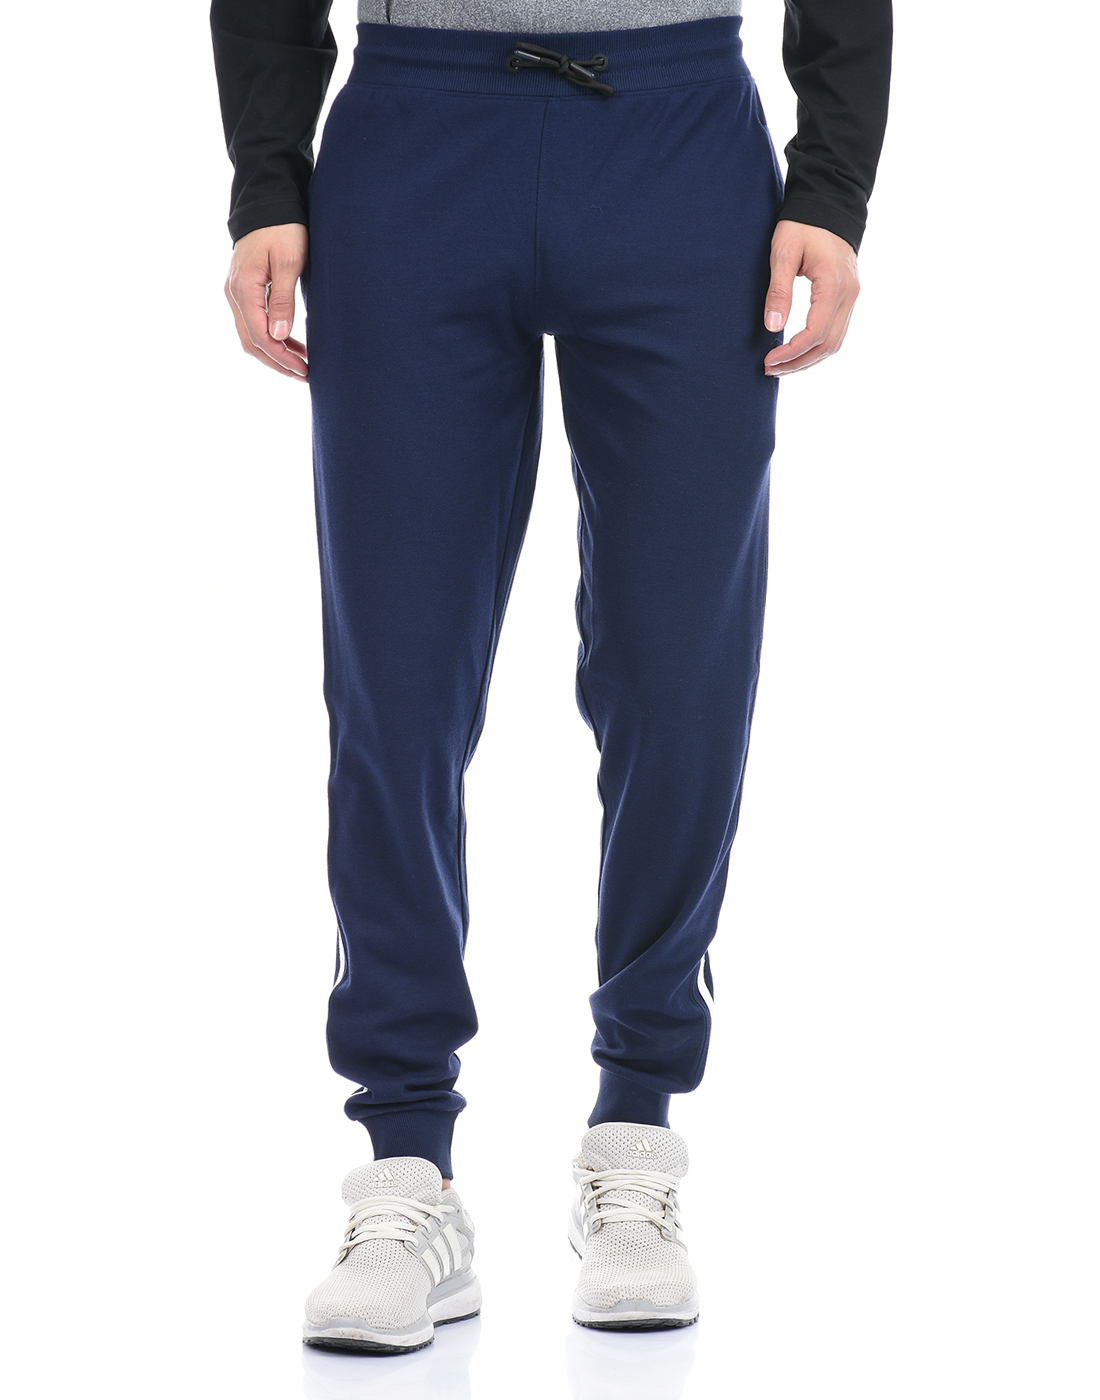 UZARUS Men's Cotton Regular fit Joggers Track Pants with 2 Zippered Po